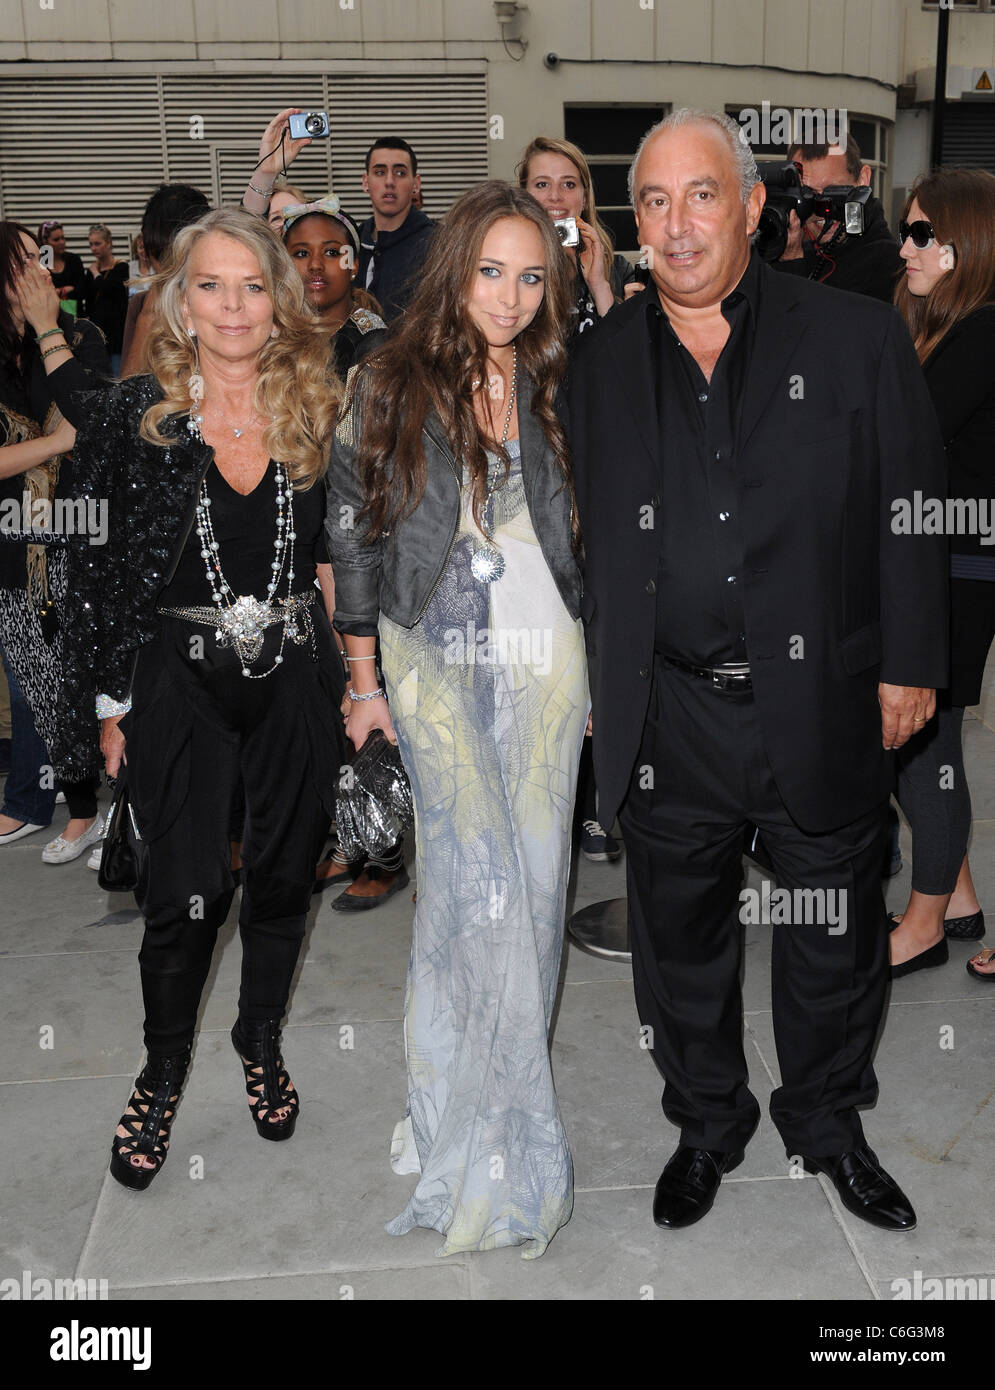 Sir Philip Green with family Topshop opens at Knightsbridge - arrivals.  London, England - 19.05.10 Stock Photo - Alamy